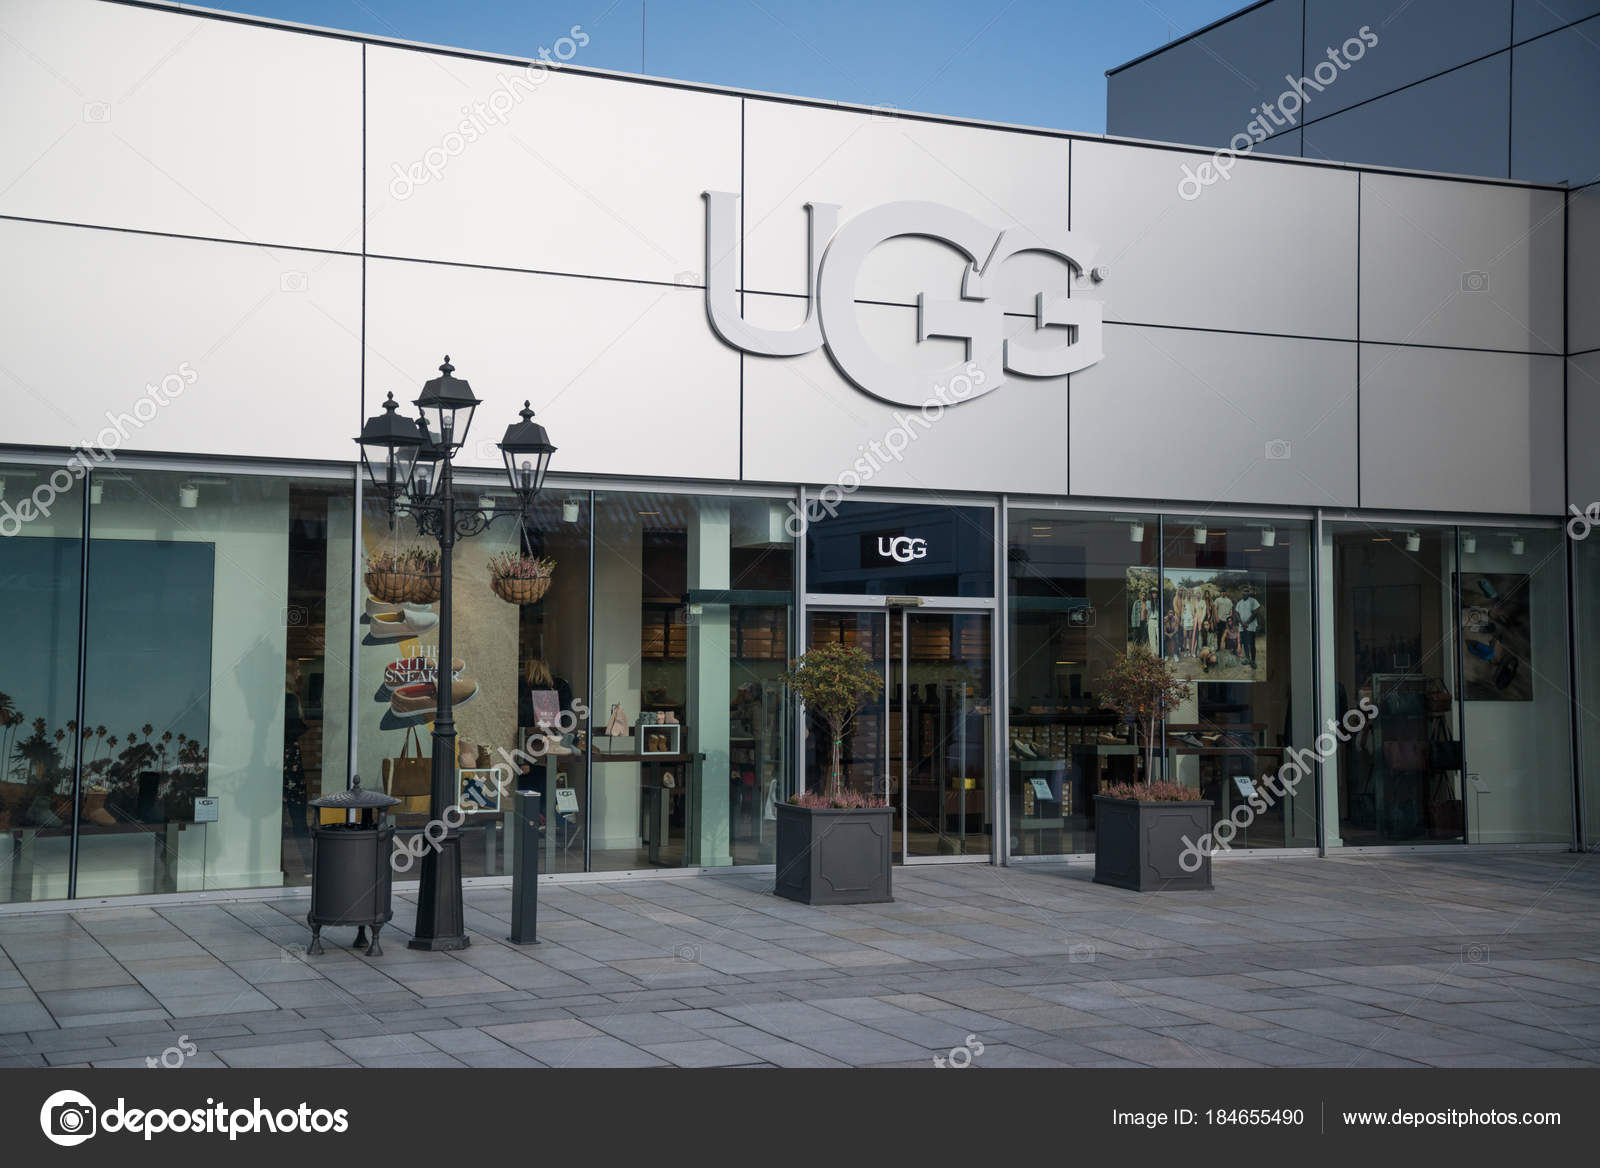 ugg store in woodfield mall